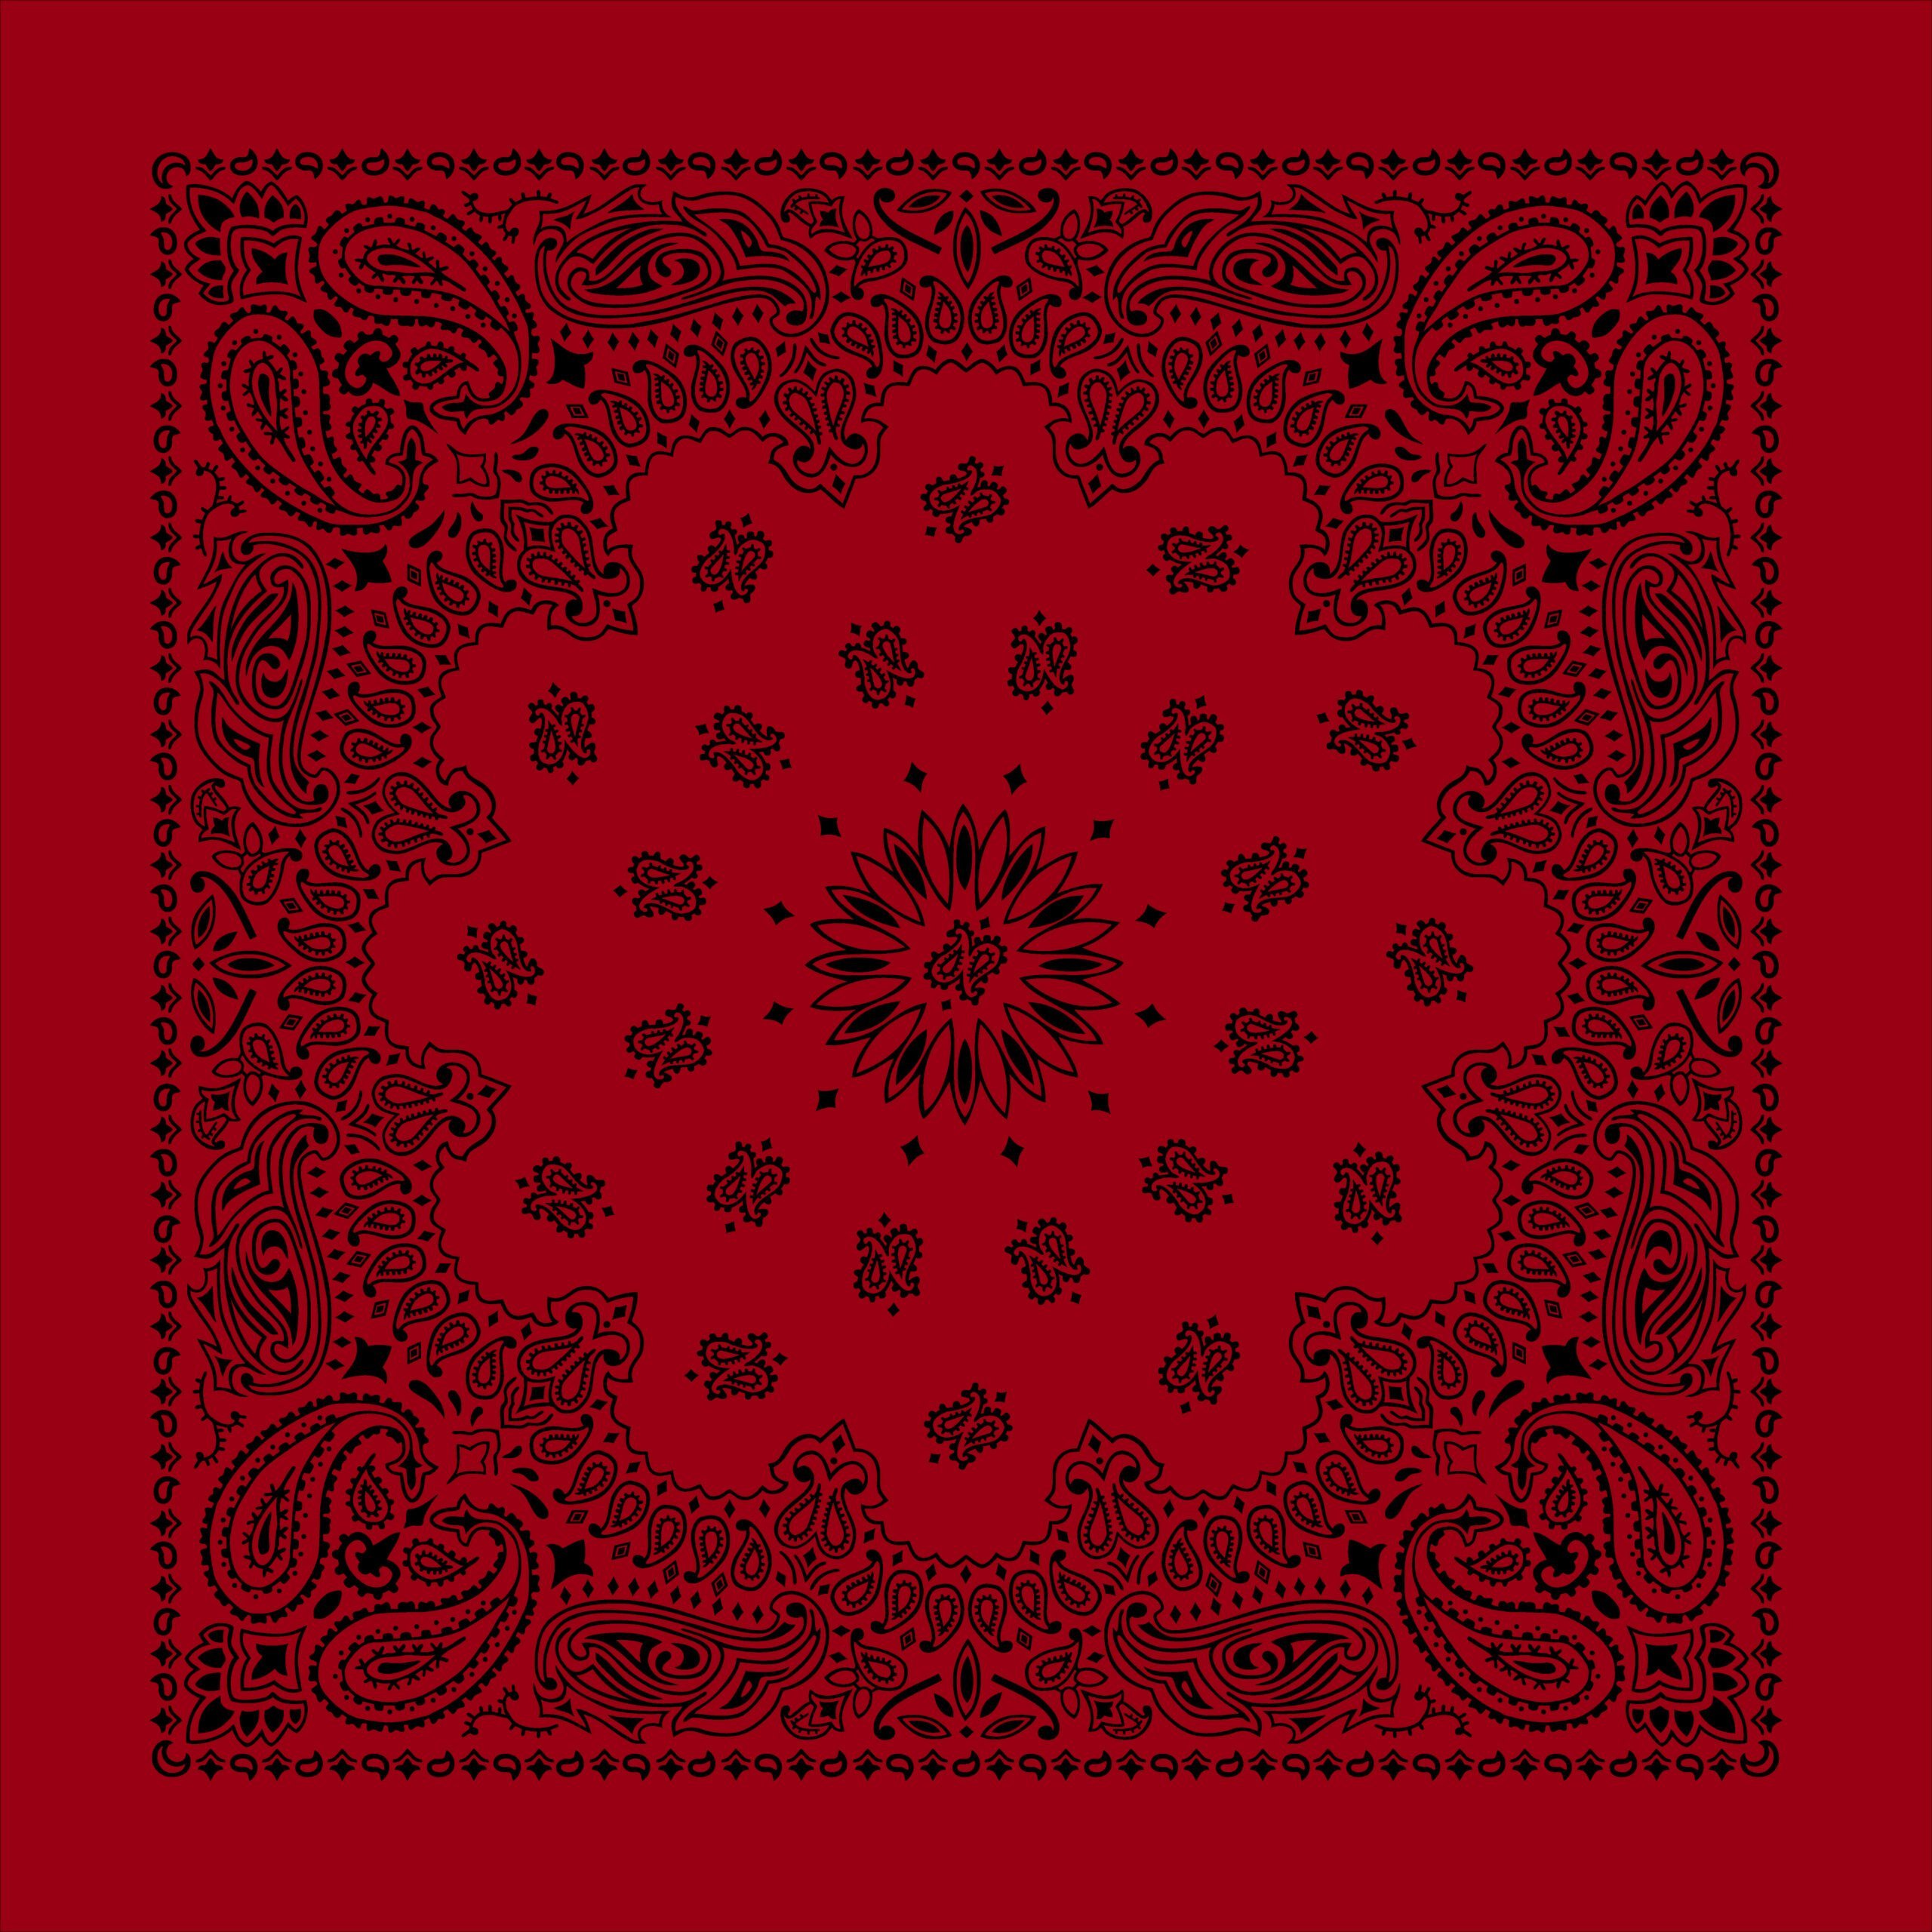 100% Cotton Black/Red Western Paisley bandanas - Single Piece - 27x27 Inches